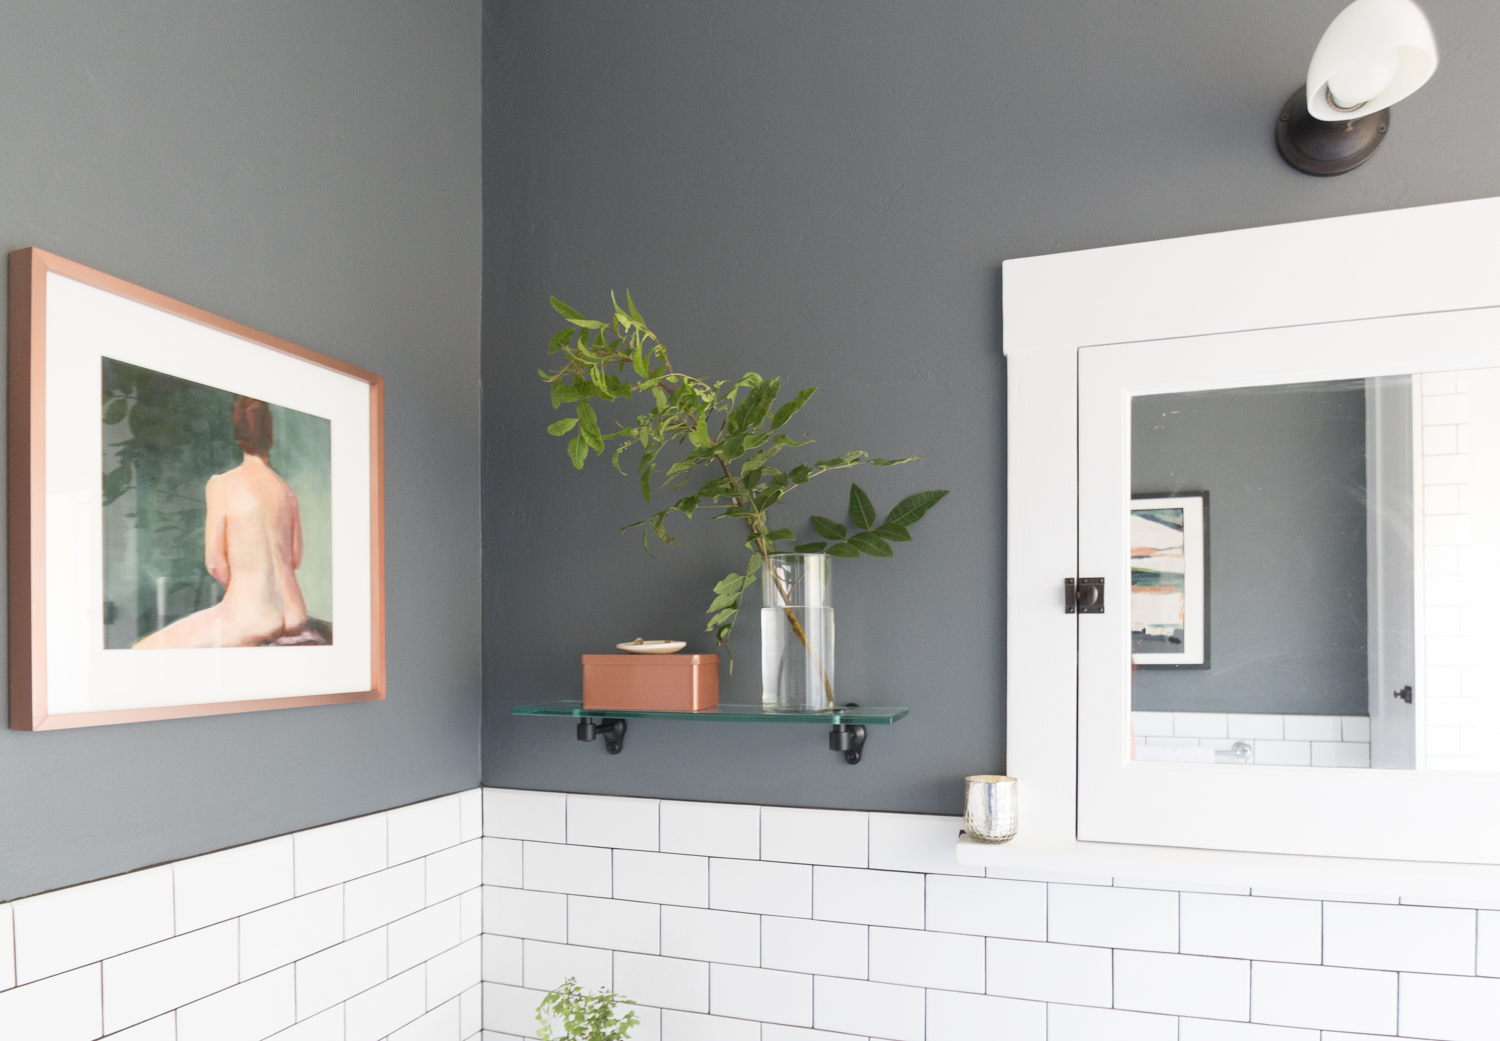 Selecting Paired Art For The Bathroom, How To Choose Wall Art For Bathroom